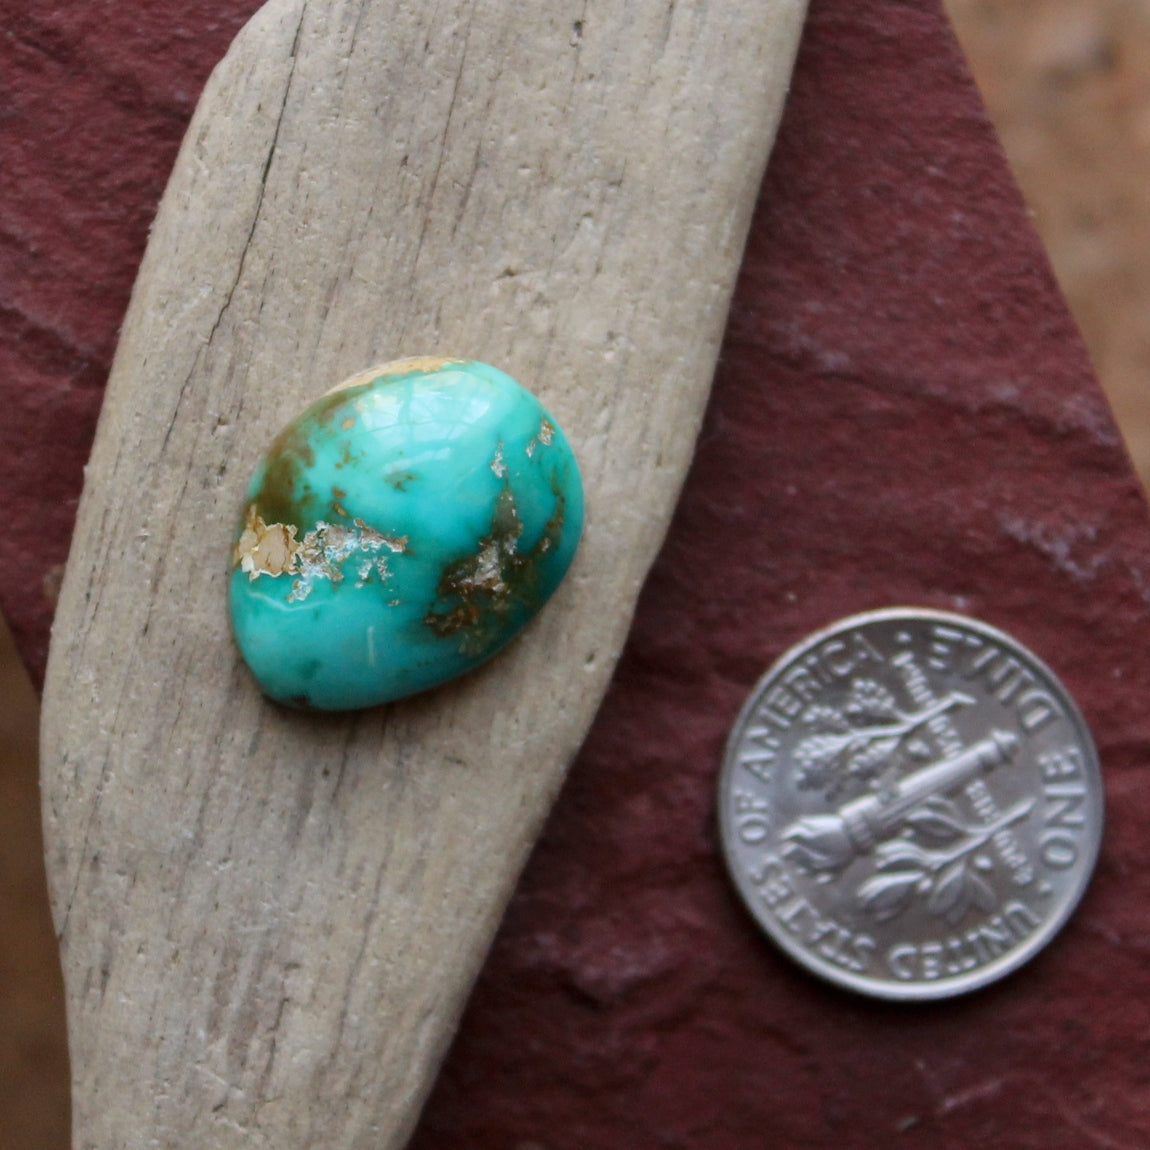 10 carat teal blue Stone Mountain Turquoise cabochon with vivid color